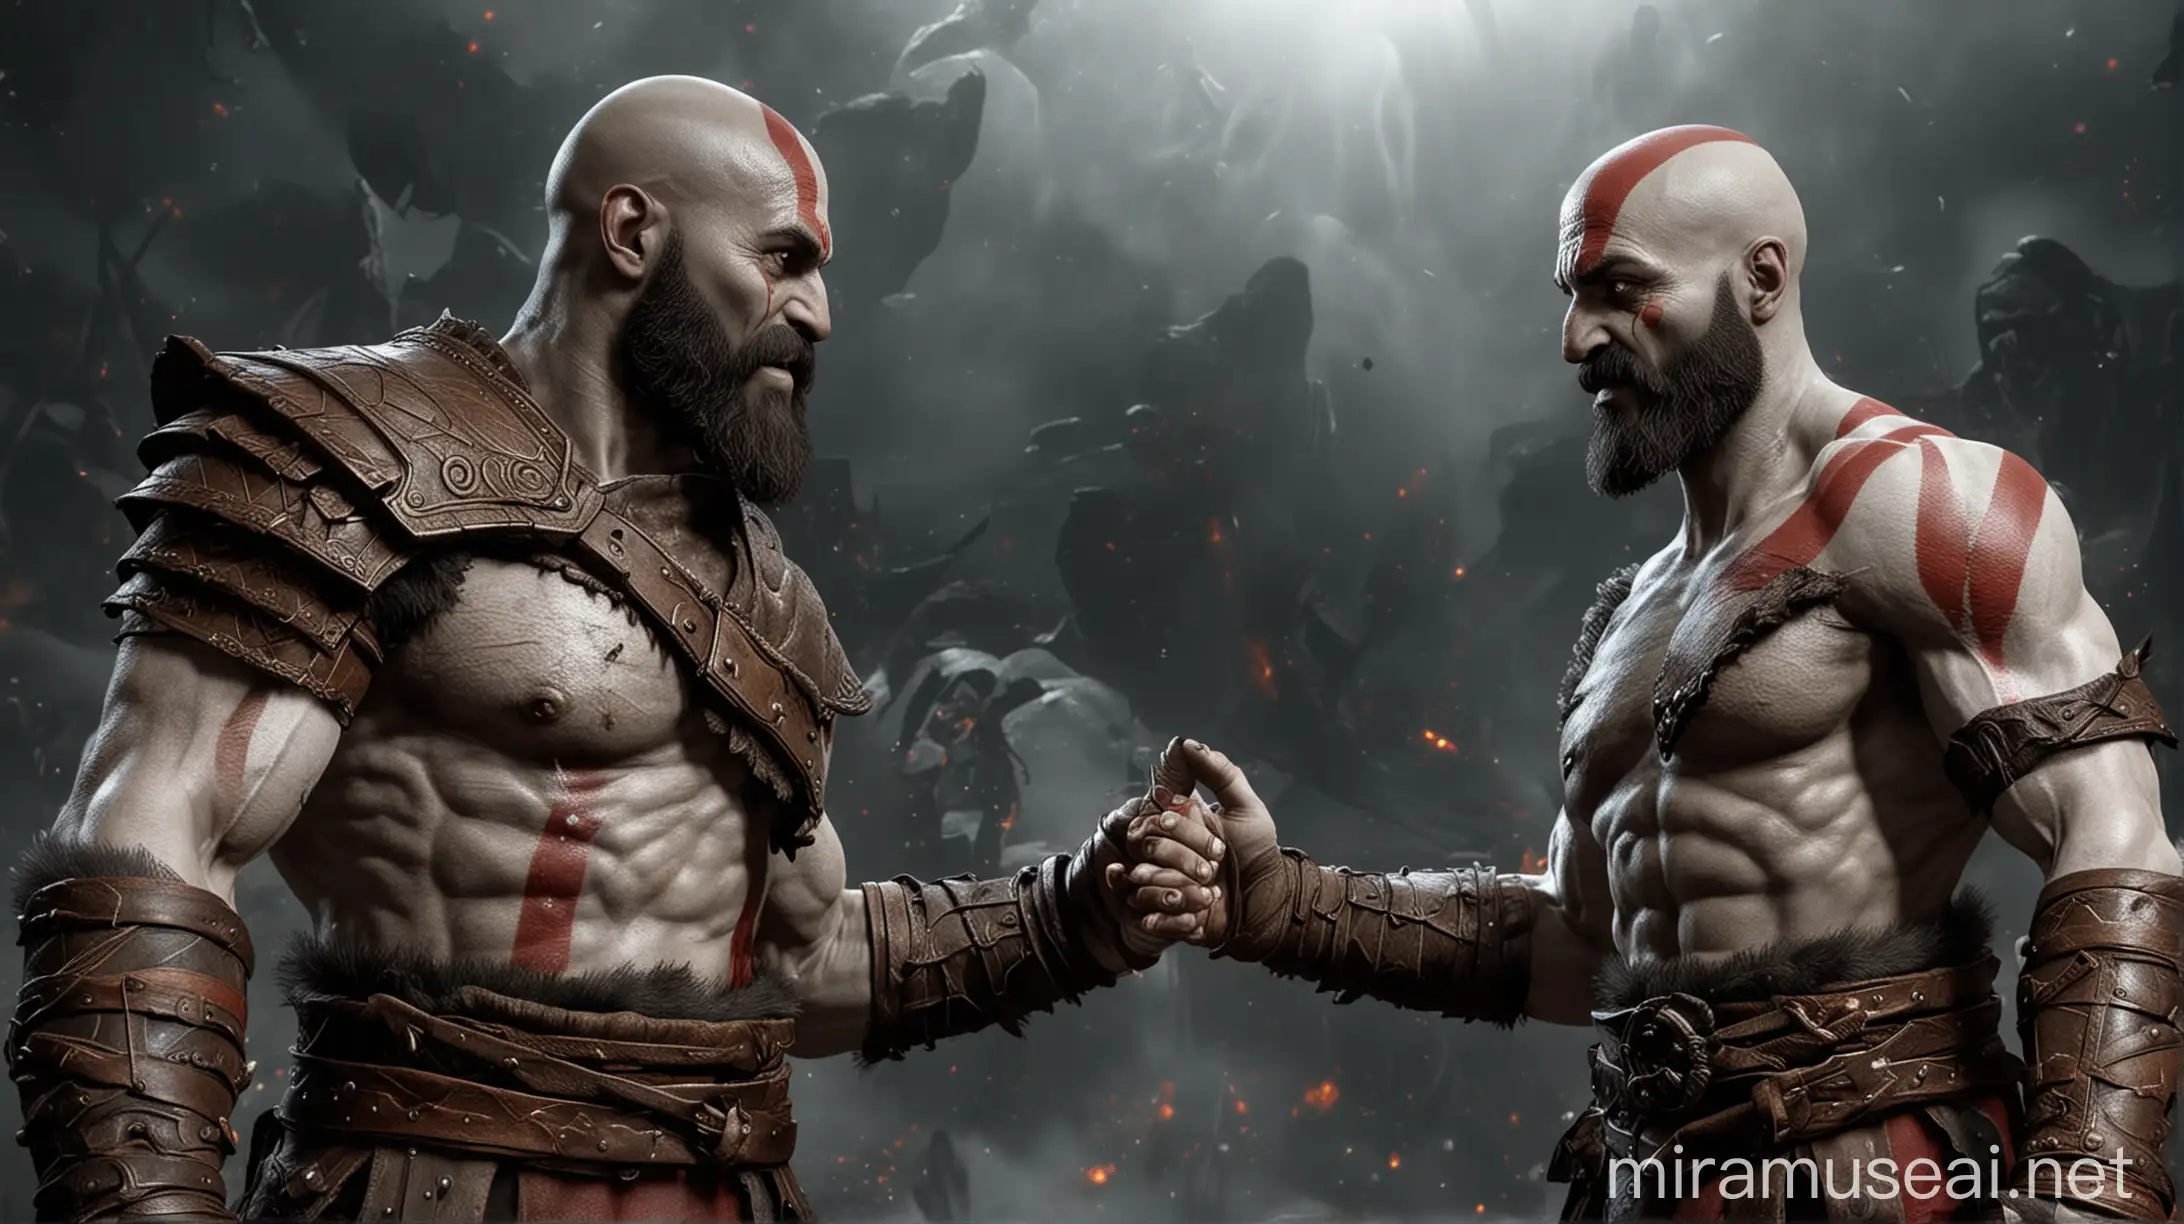 Formally Dressed Kratos Shaking Hands